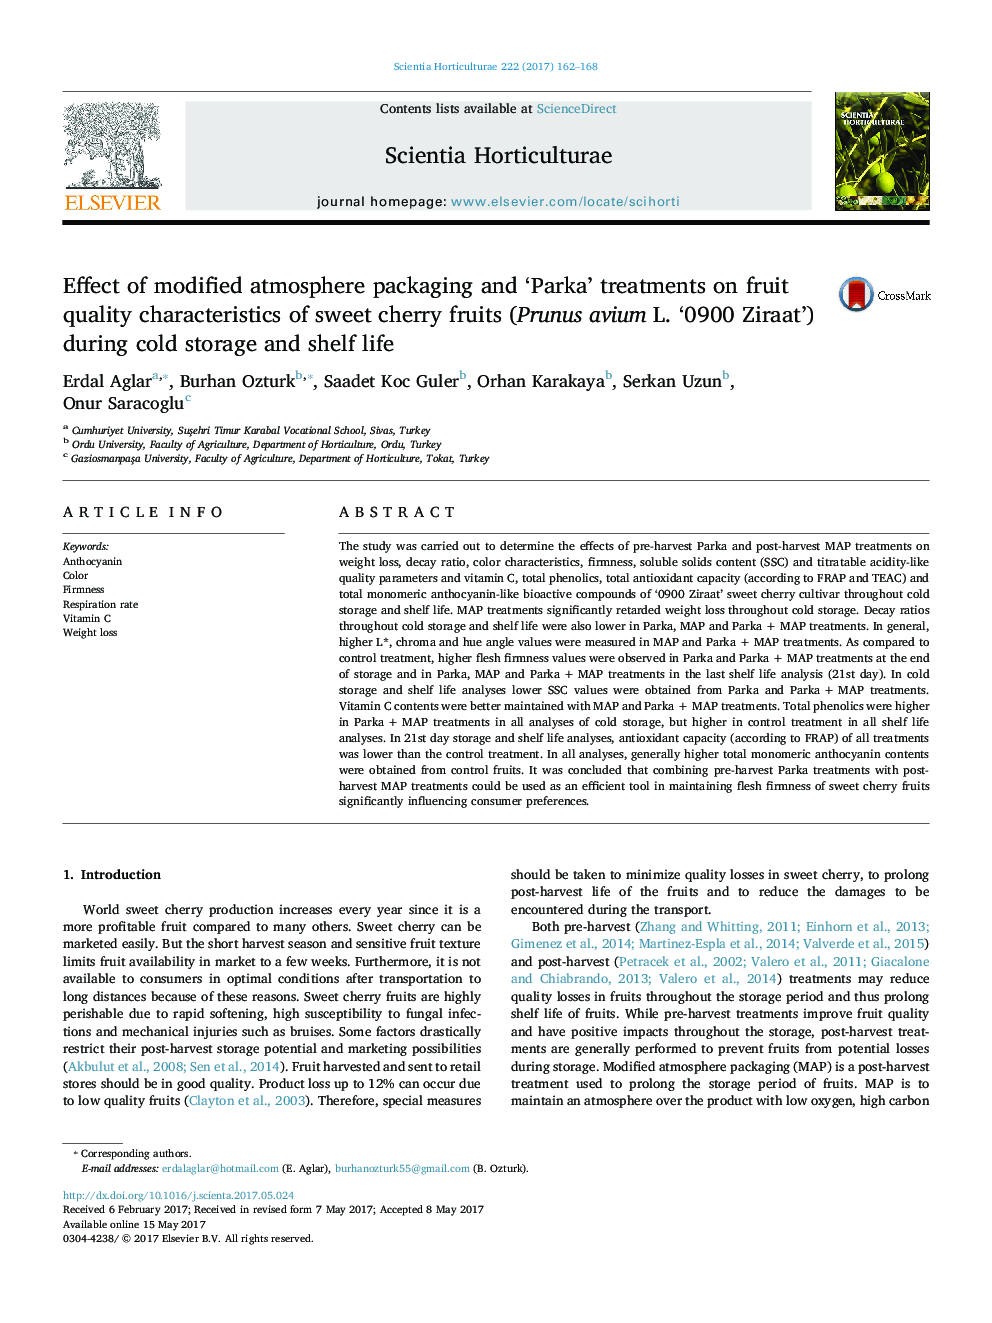 Effect of modified atmosphere packaging and 'Parka' treatments on fruit quality characteristics of sweet cherry fruits (Prunus avium L. '0900 Ziraat') during cold storage and shelf life